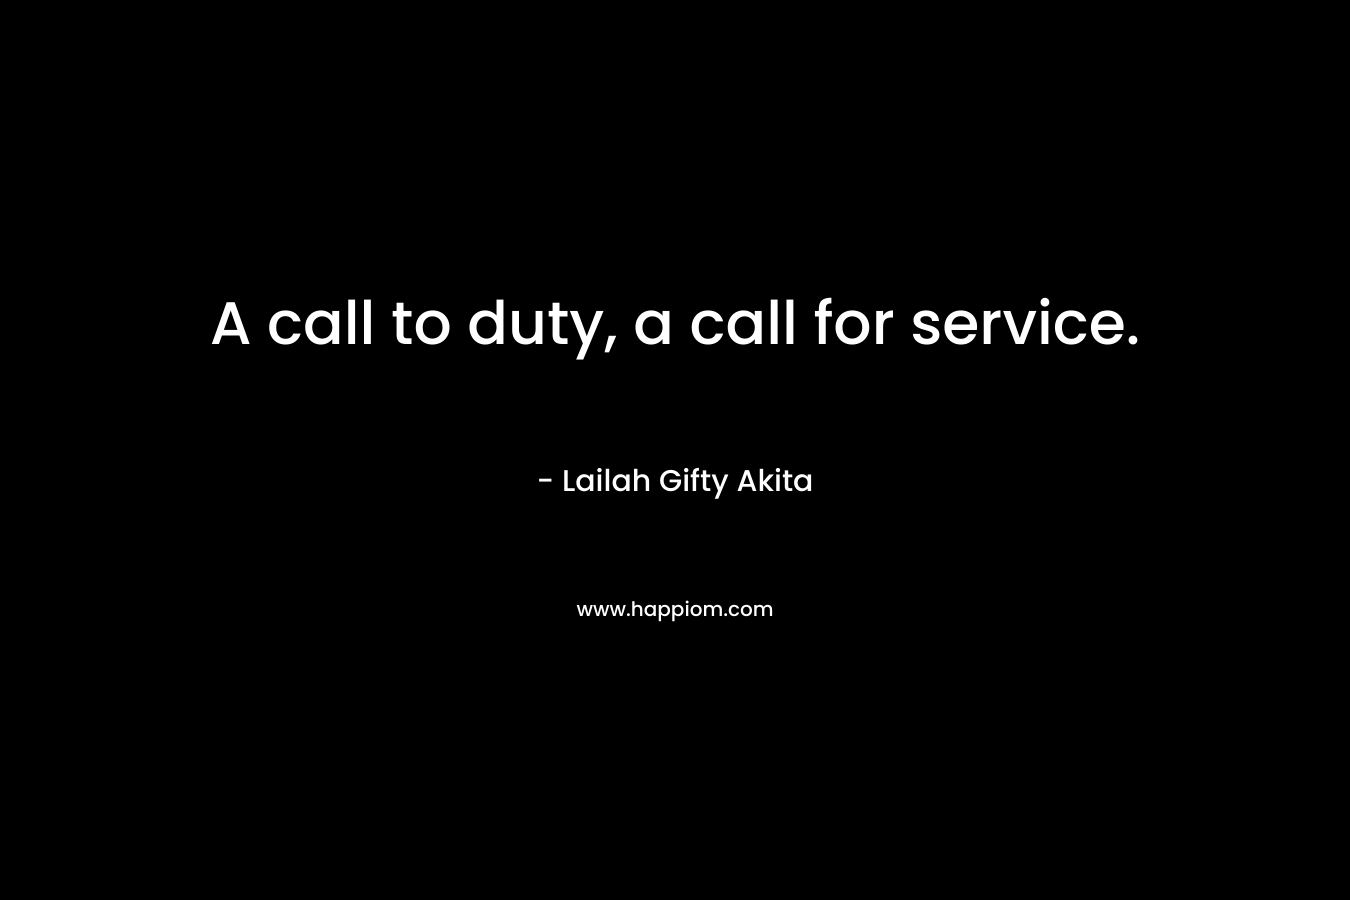 A call to duty, a call for service.